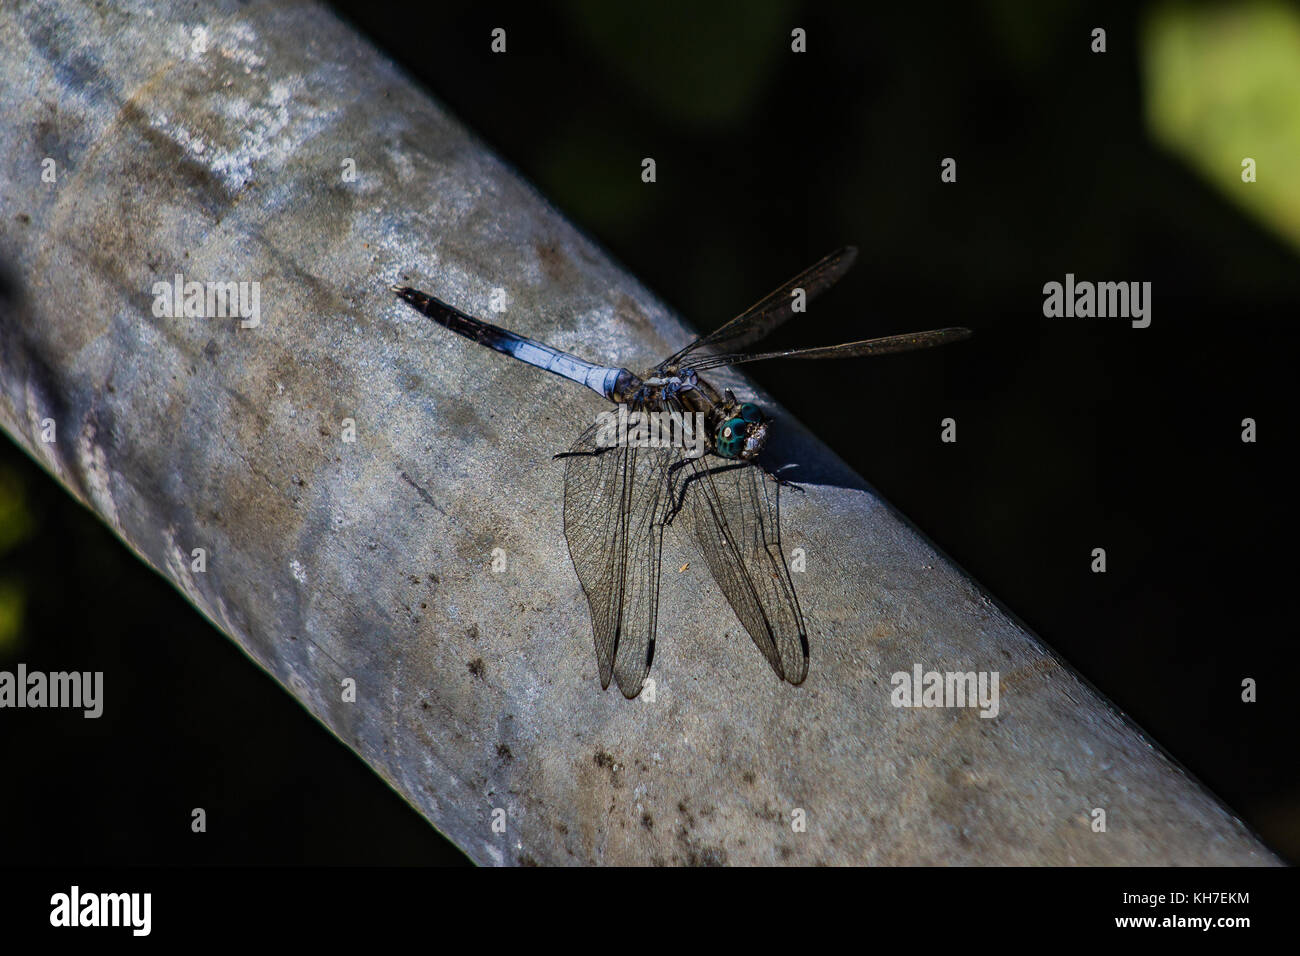 A Japanese blue dragonfly rests on a pipe in Kamakura, Japan Stock Photo